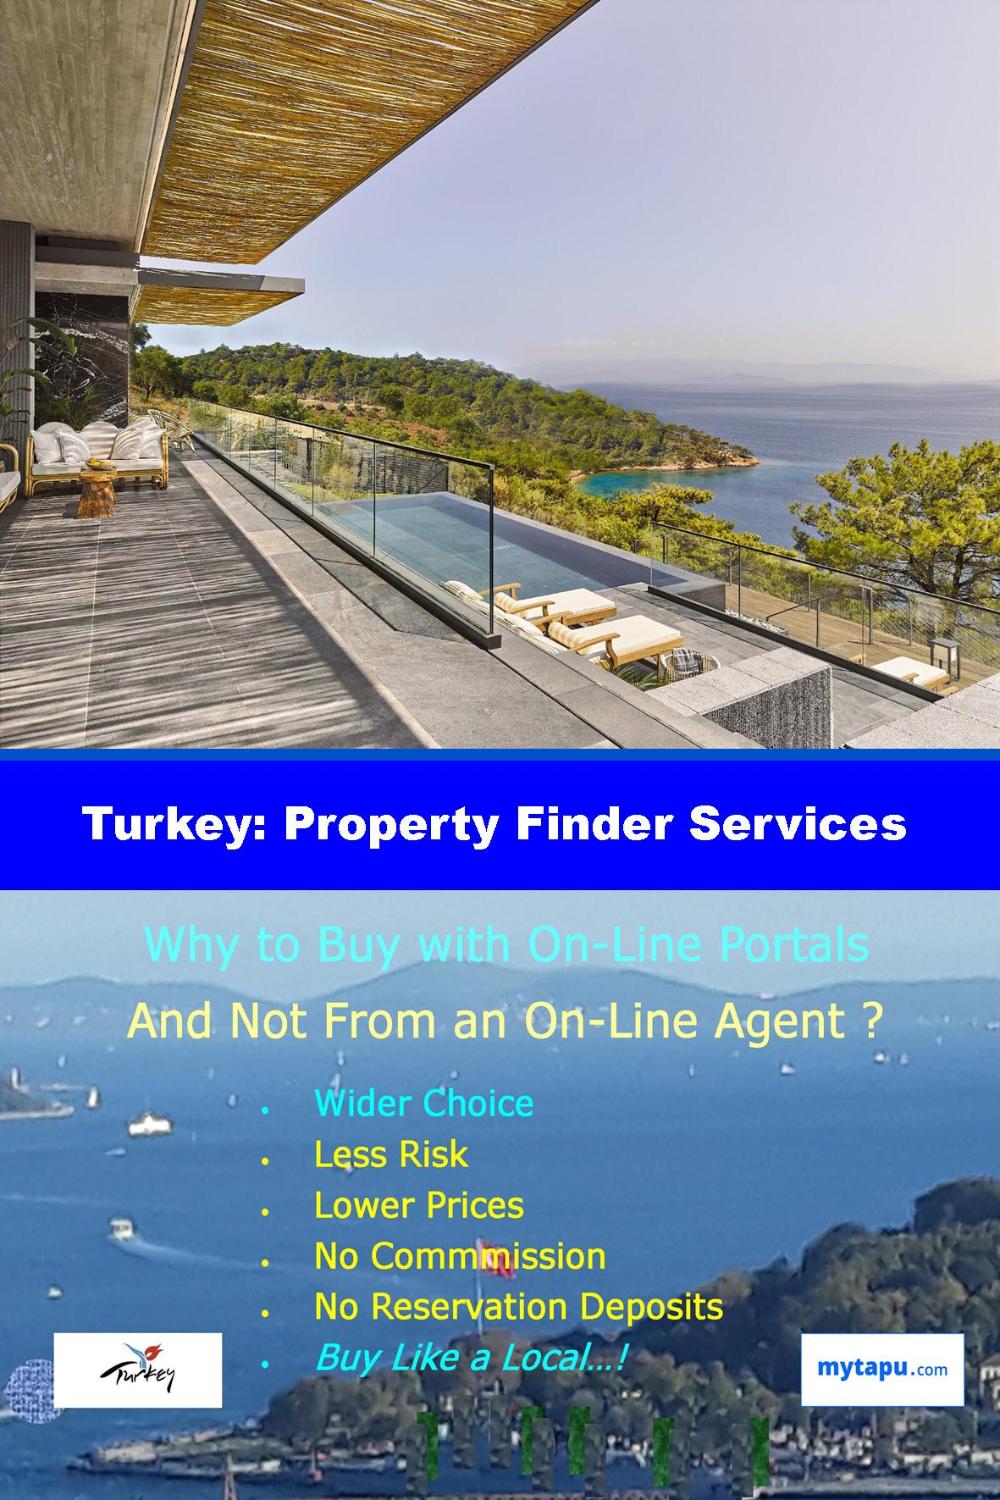 Exclusive Luxury Property for Investment in Turkey's Prime Coastal  Locations